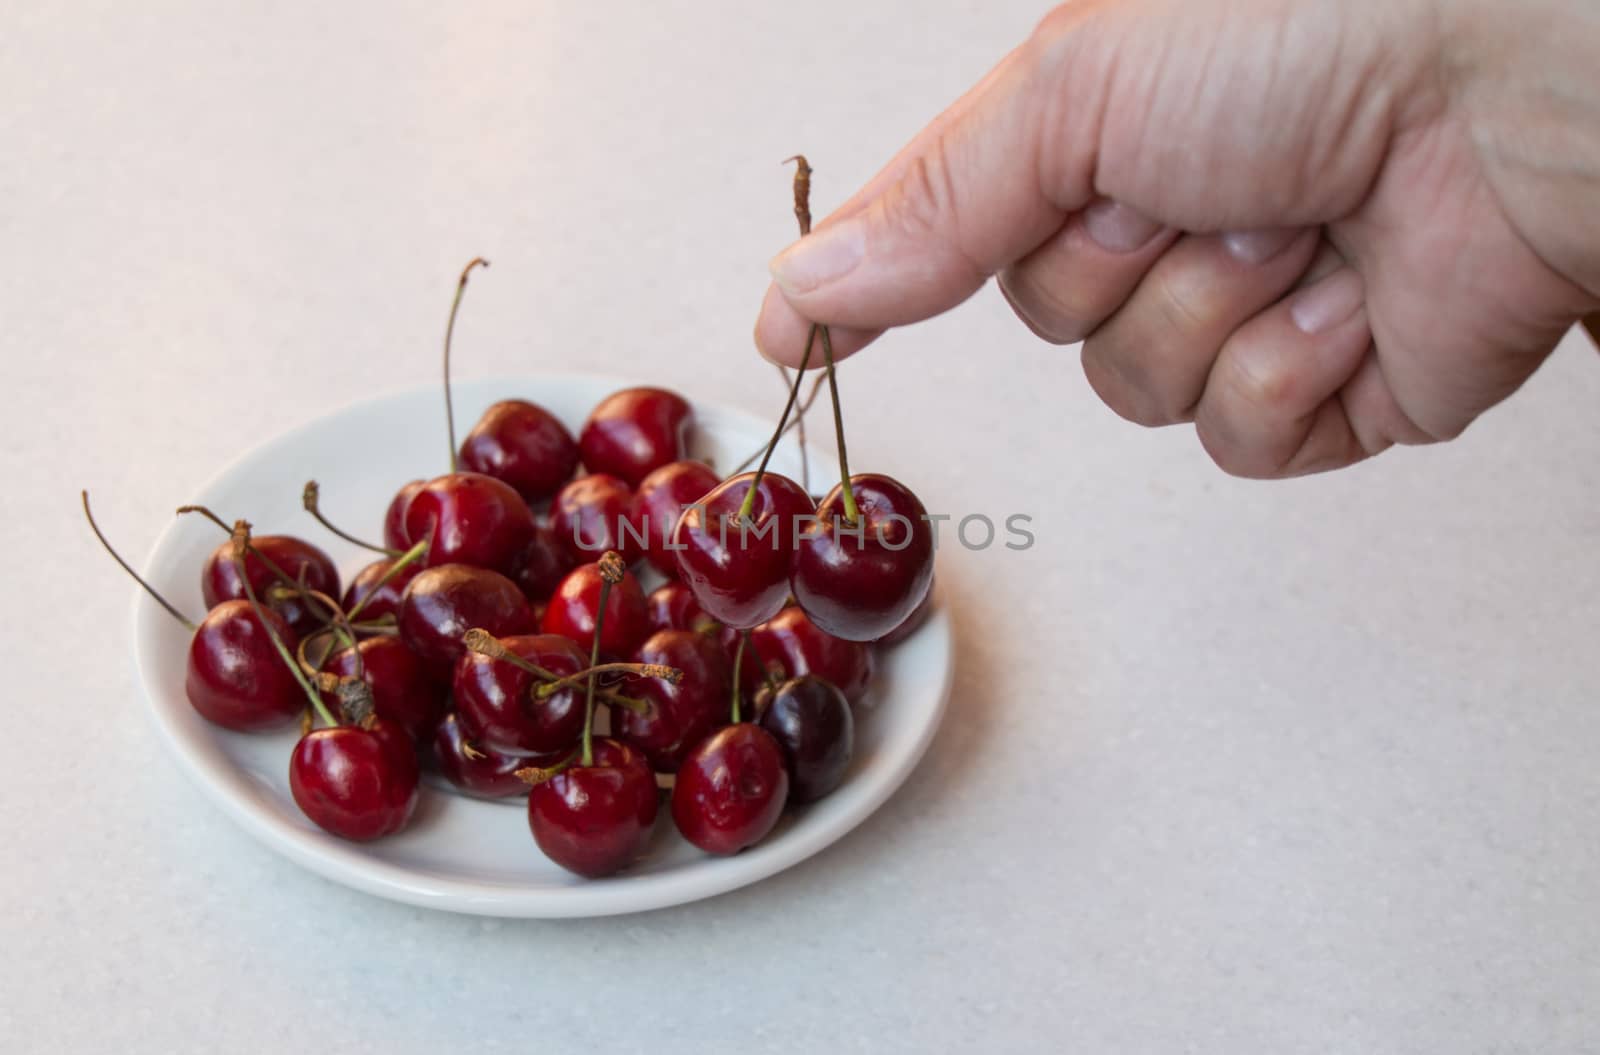 Sweet cherry in the hand and on a white plate, selective focus on the berries.